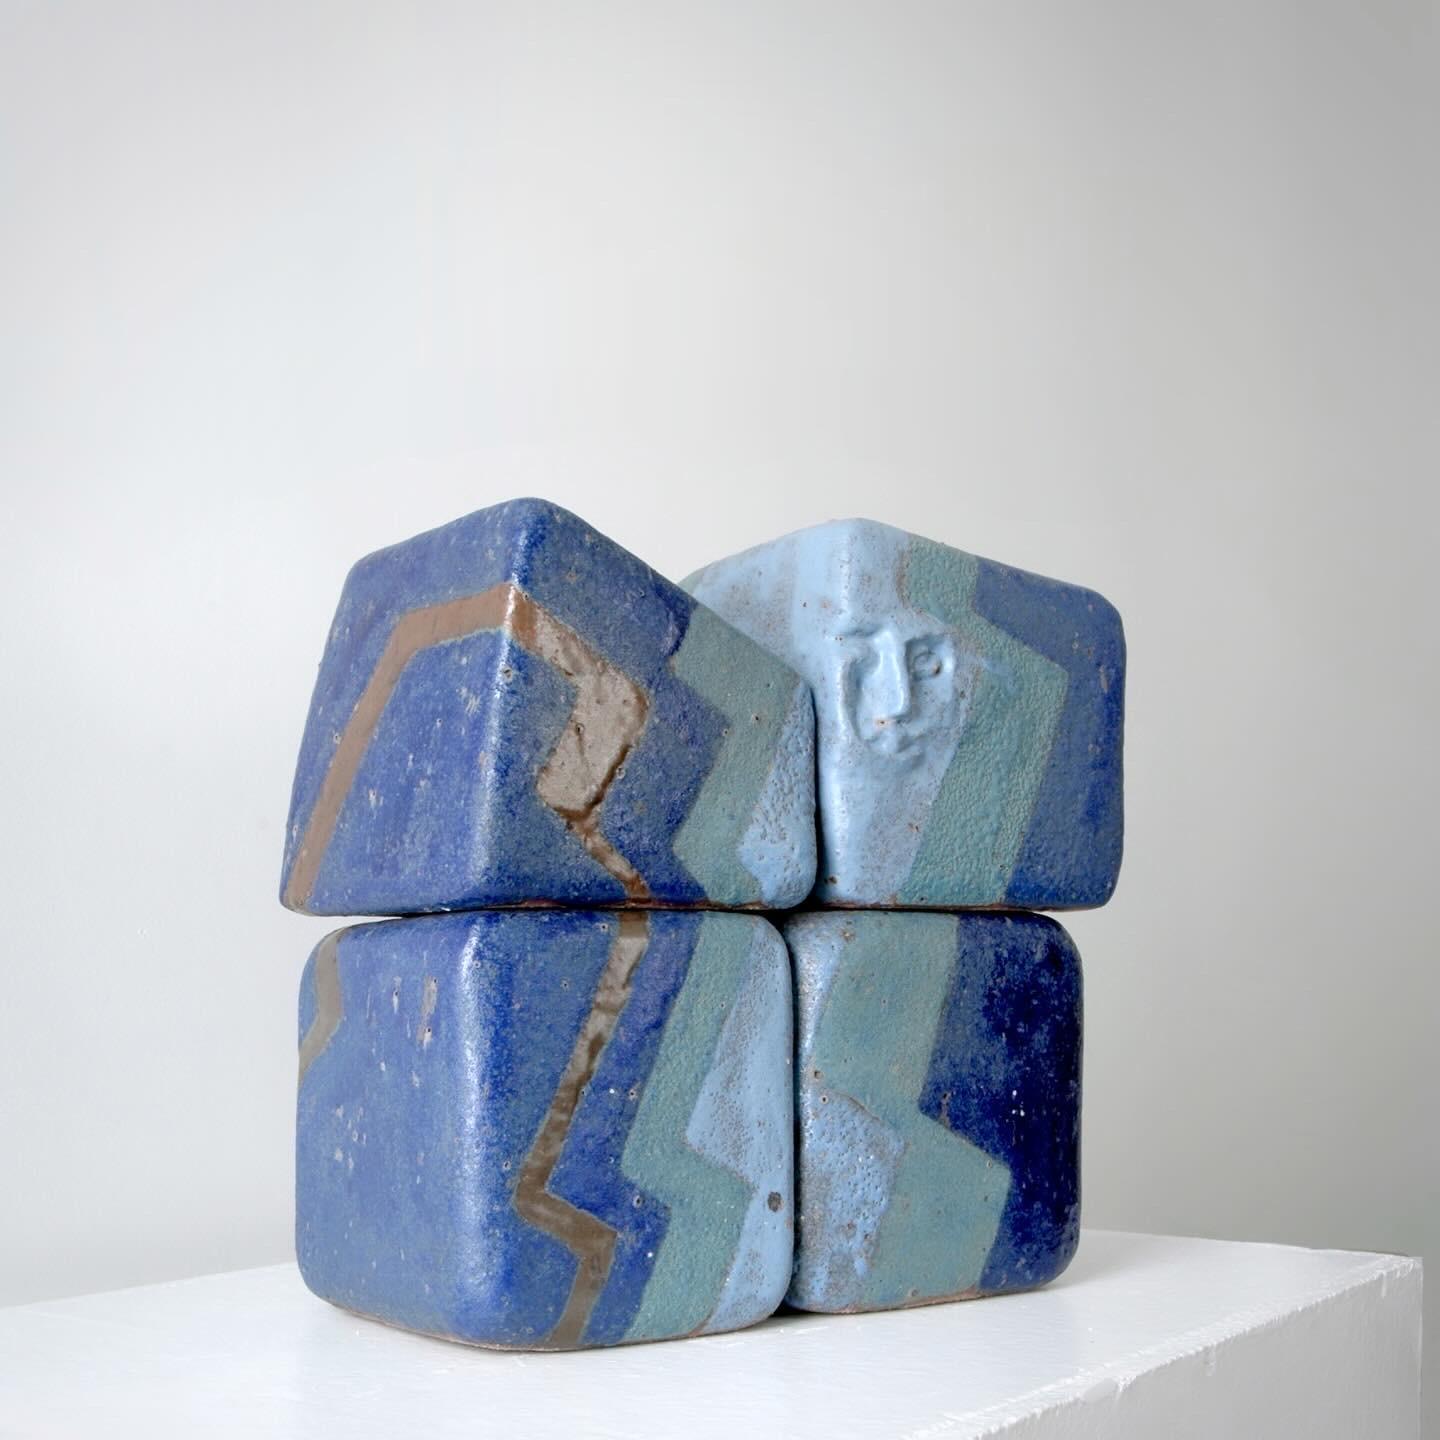 Anthropomorphic Sculpture by Andrée & Michel Hirlet, 2000’s. 
Unique piece made of glazed stoneware — H 31 x 31 x 17,5 cm.

Throughout their career, the Hirlets chose to follow a path that bypassed well-worn artistic conventions. They distanced